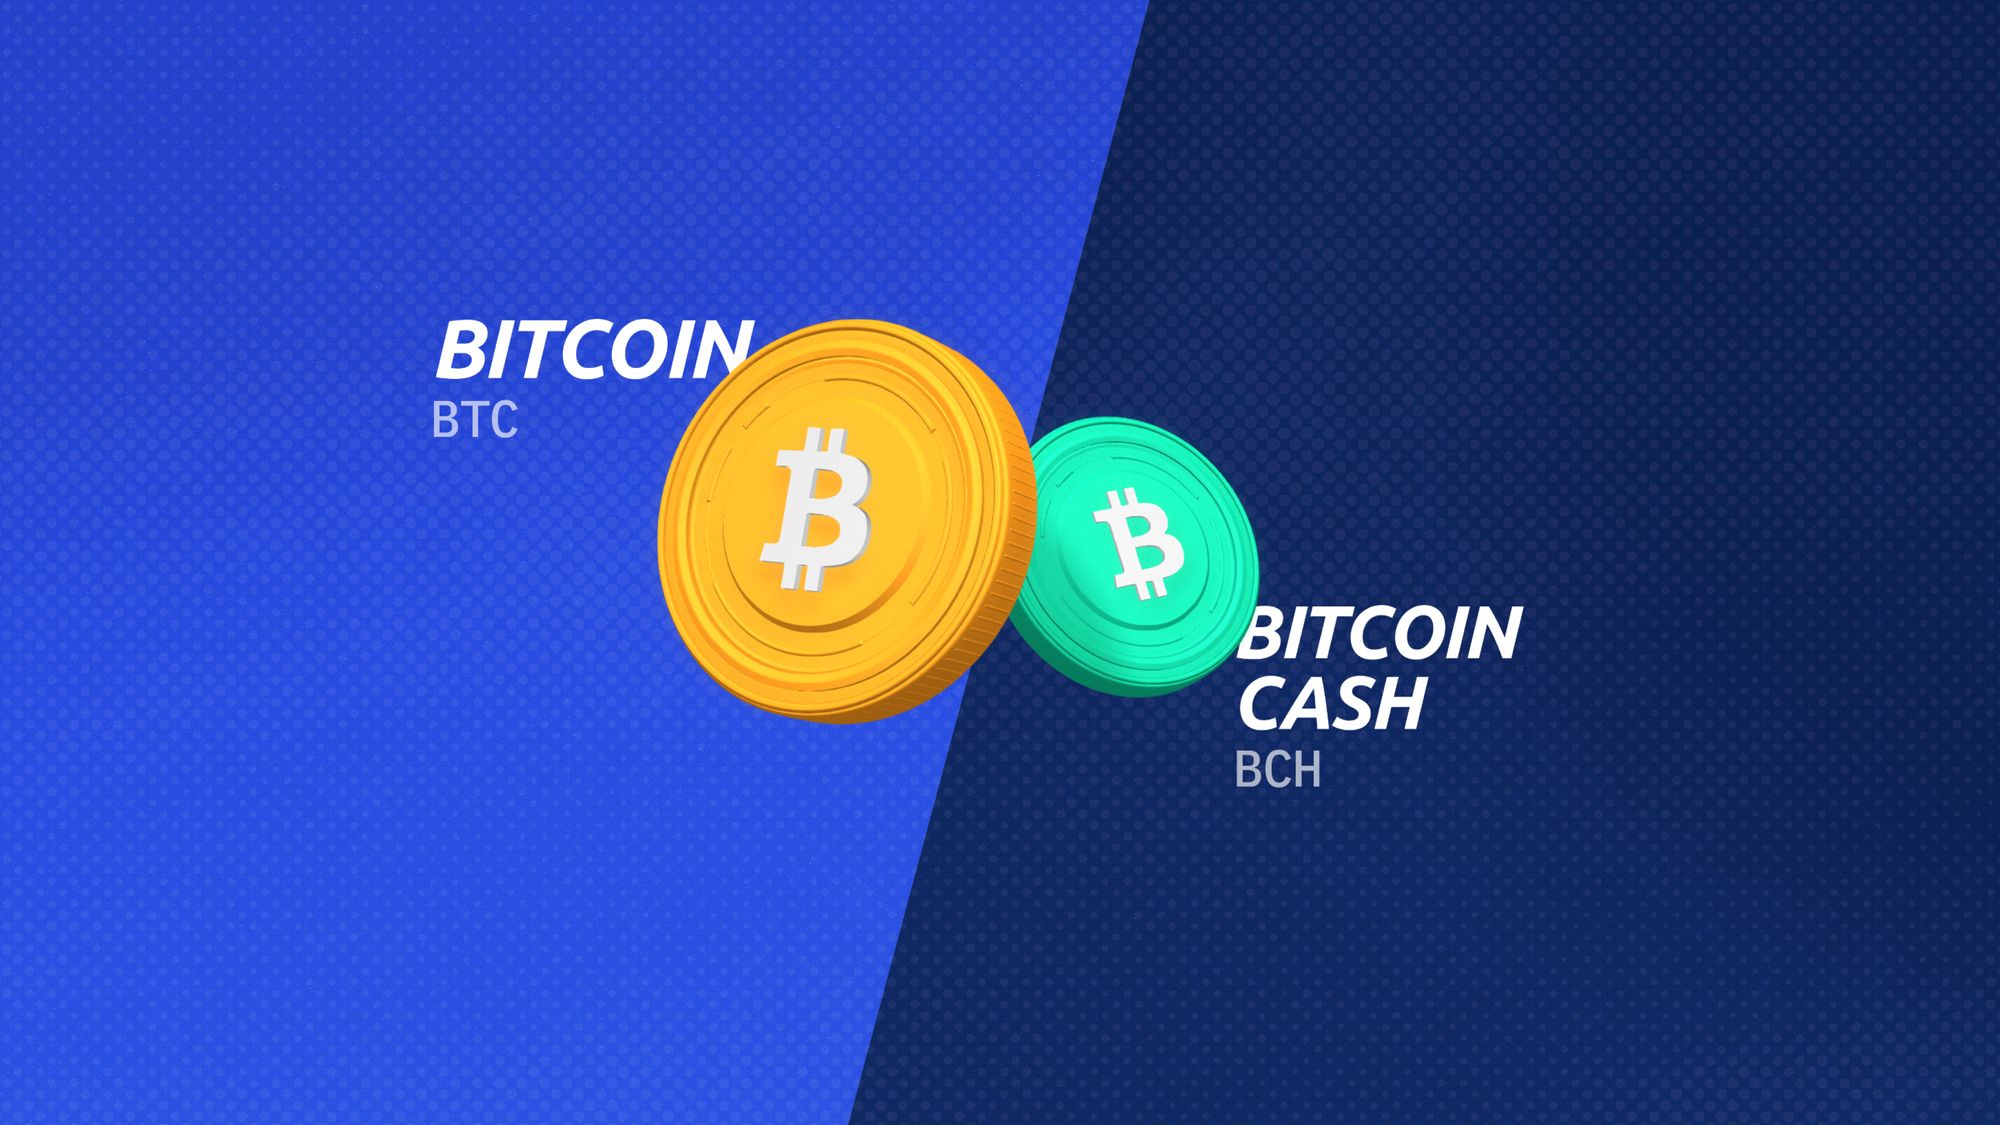 Bitcoin (BTC) vs Bitcoin Cash (BCH): Exploring the Differences in Origin, Use Cases, and Investment Potential